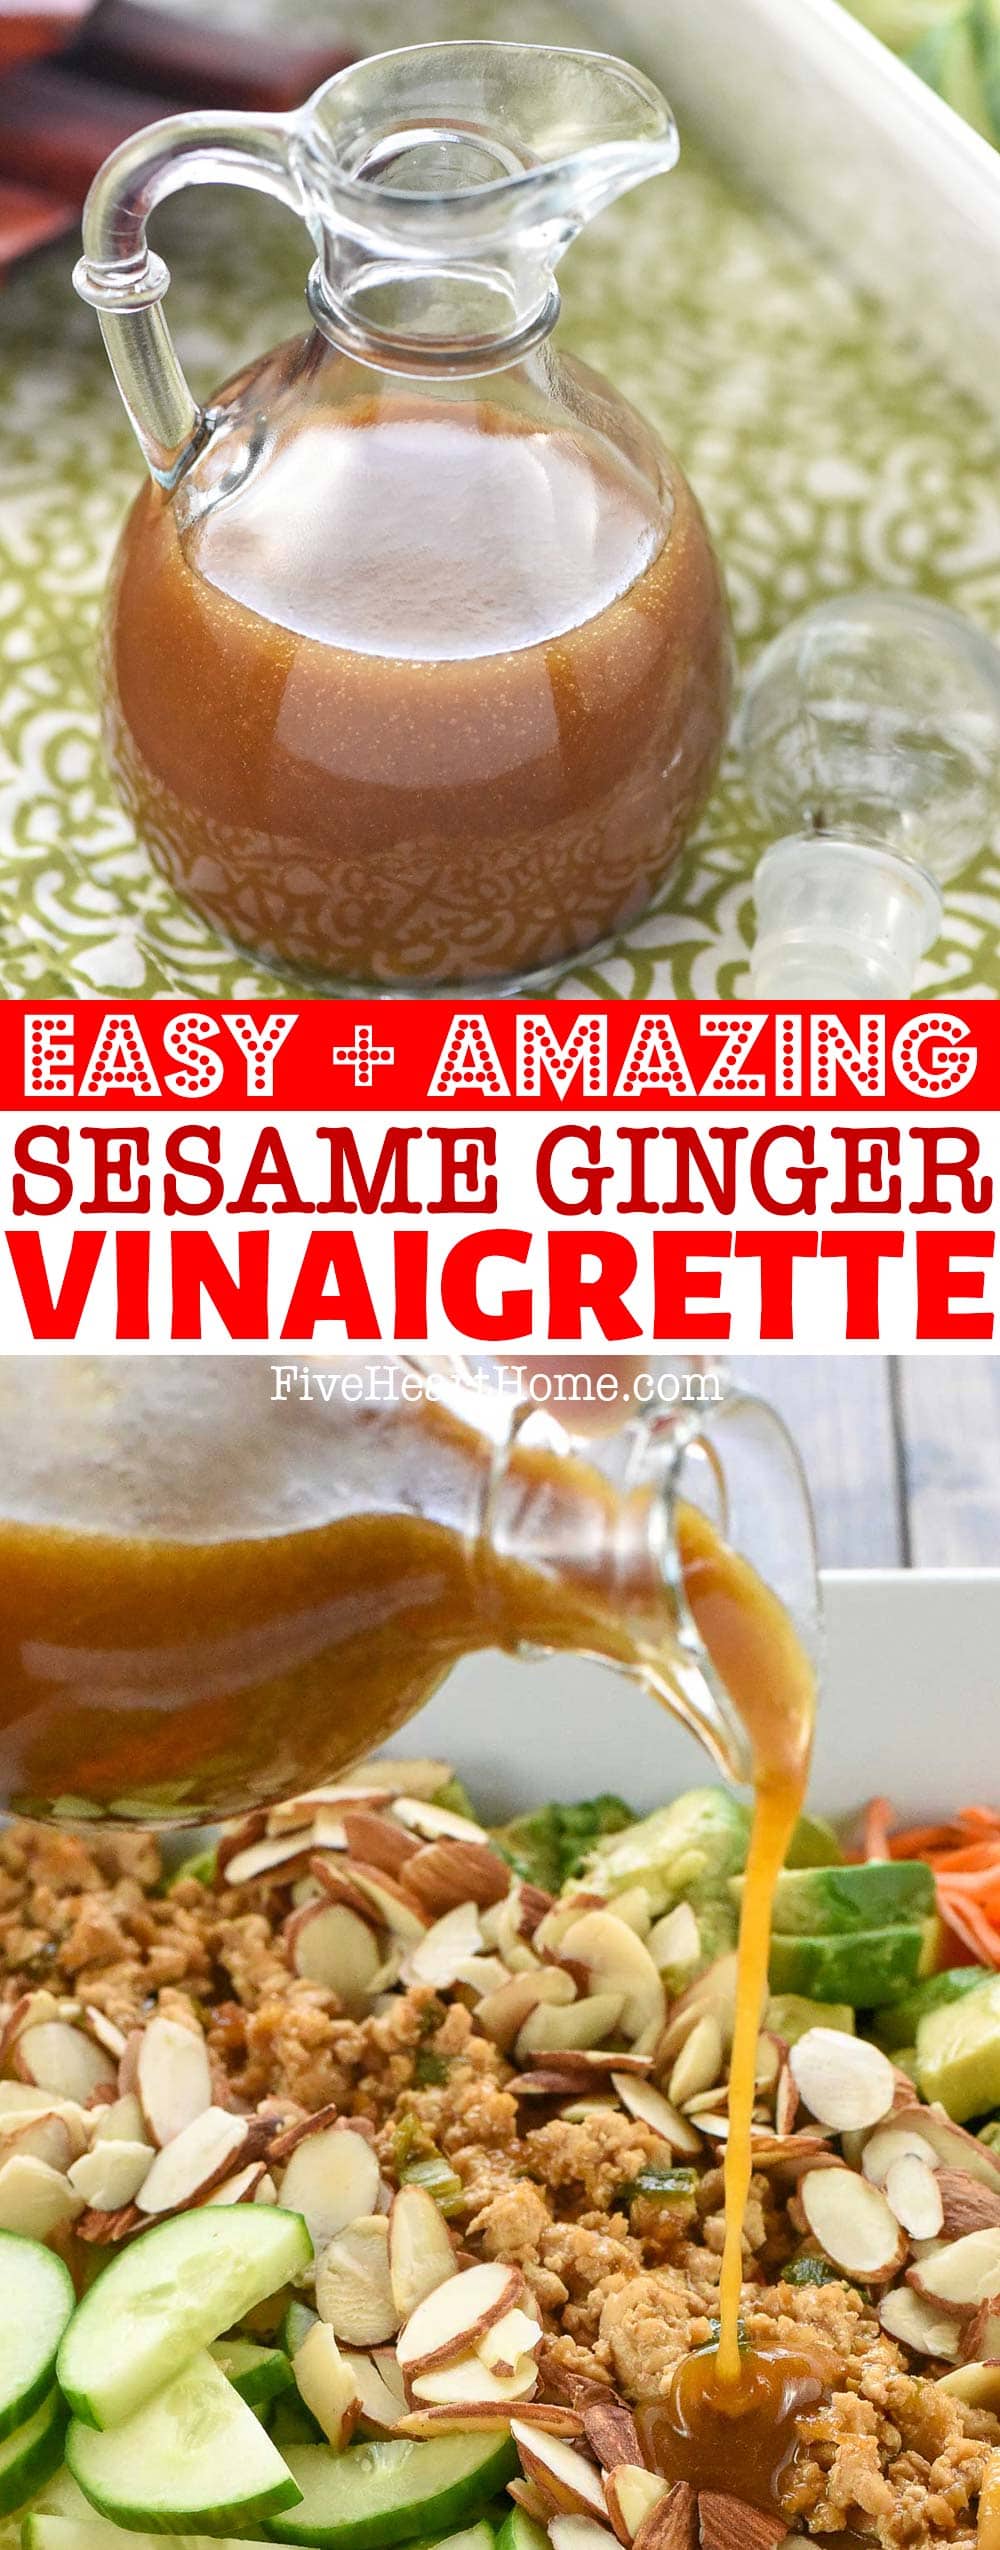 Asian Salad Dressing ~ an easy, from-scratch sesame ginger vinaigrette that's bursting with flavors of ginger, garlic, sesame oil, soy sauce, rice vinegar, and honey! This Asian dressing recipe is delicious over green salad, sliced cucumbers, Asian slaw, and so much more! | FiveHeartHome.com via @fivehearthome